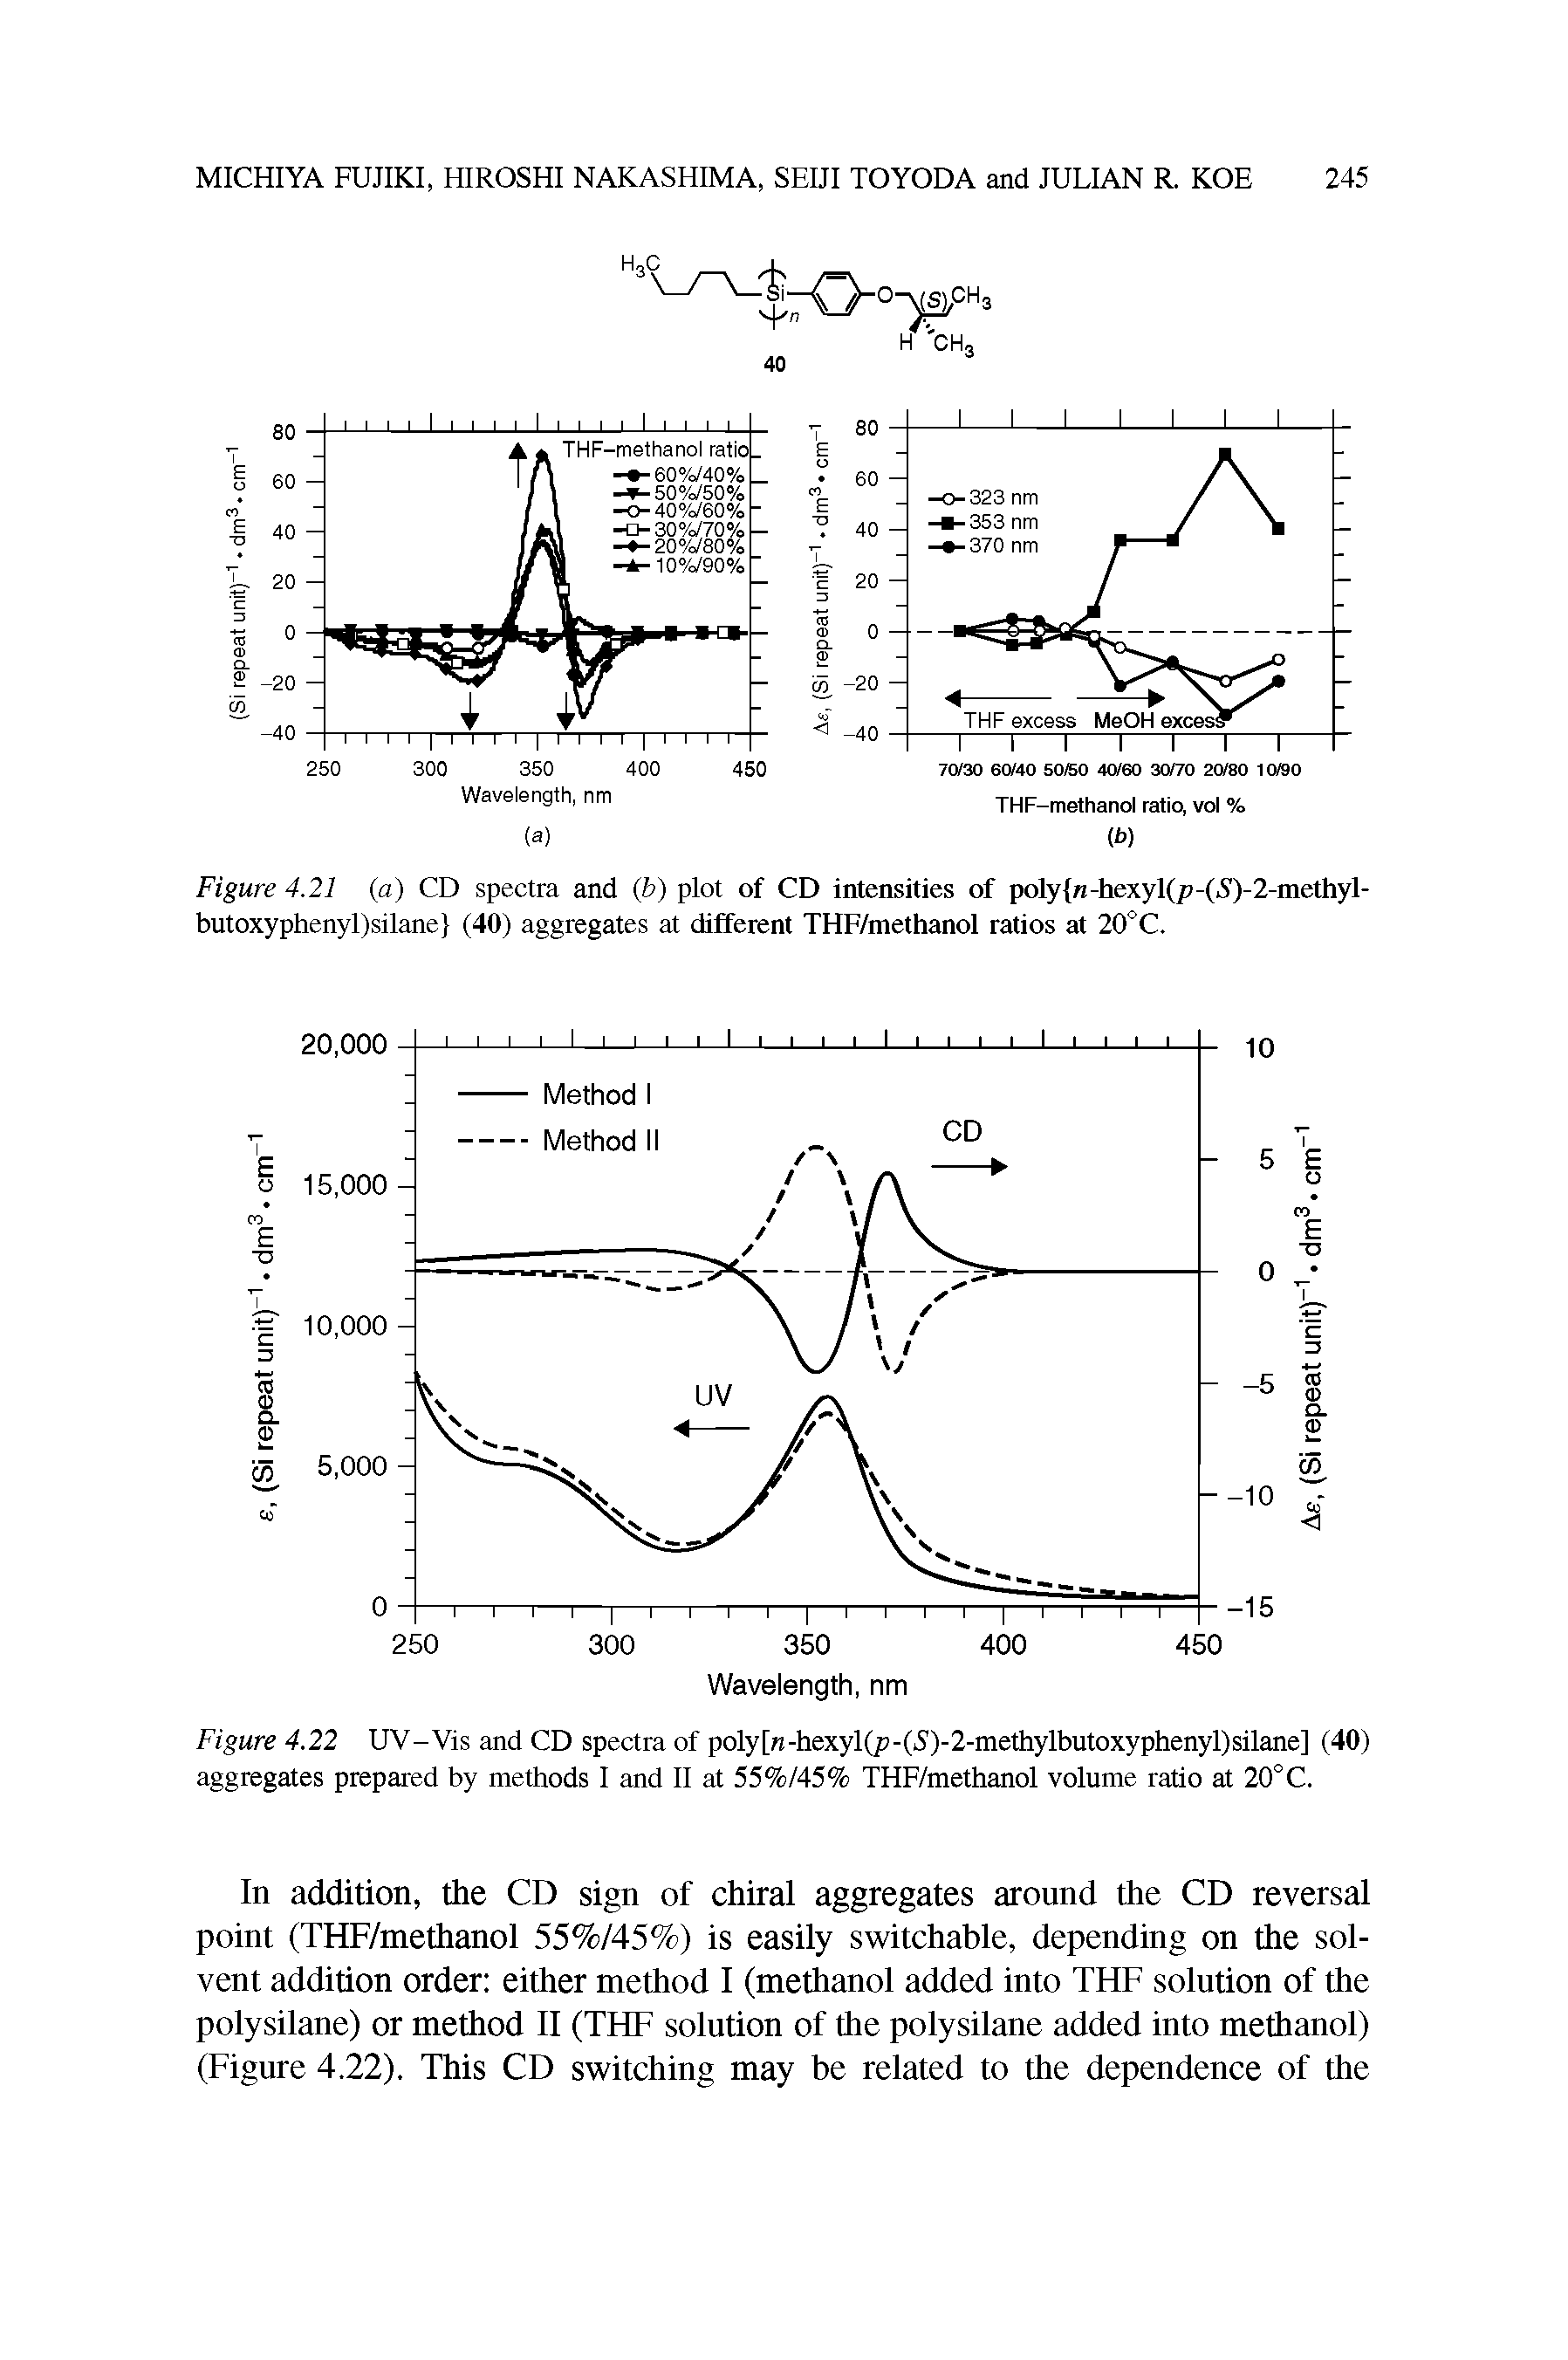 Figure 4.22 UV-Vis and CD spectra of poly[ -hexyl(/ -(S)-2-methylbutoxyphenyl)silane] (40) aggregates prepared by methods I and II at 55%/45% THF/methanol volume ratio at 20°C.